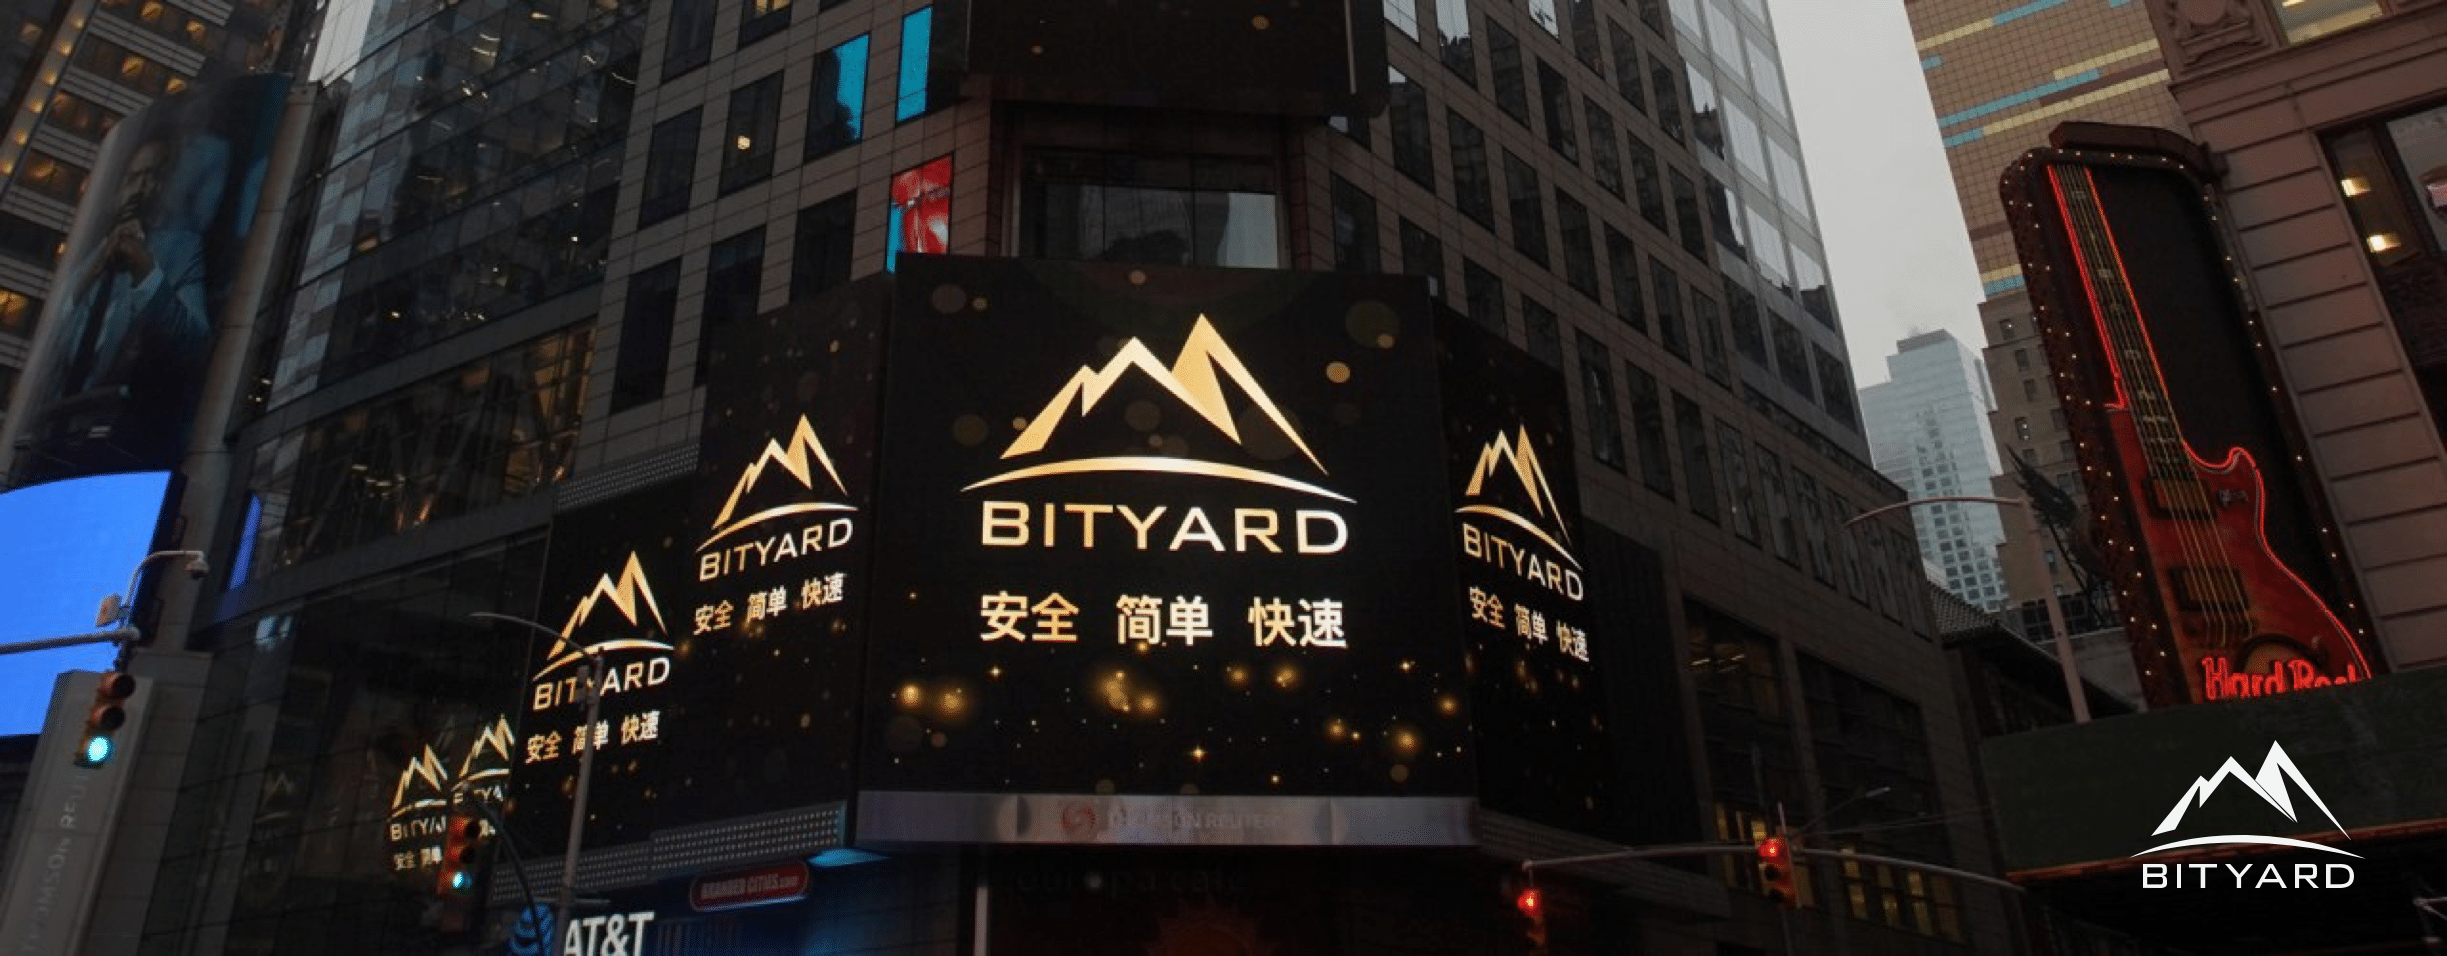 Bityard has Launched Innovation Zone